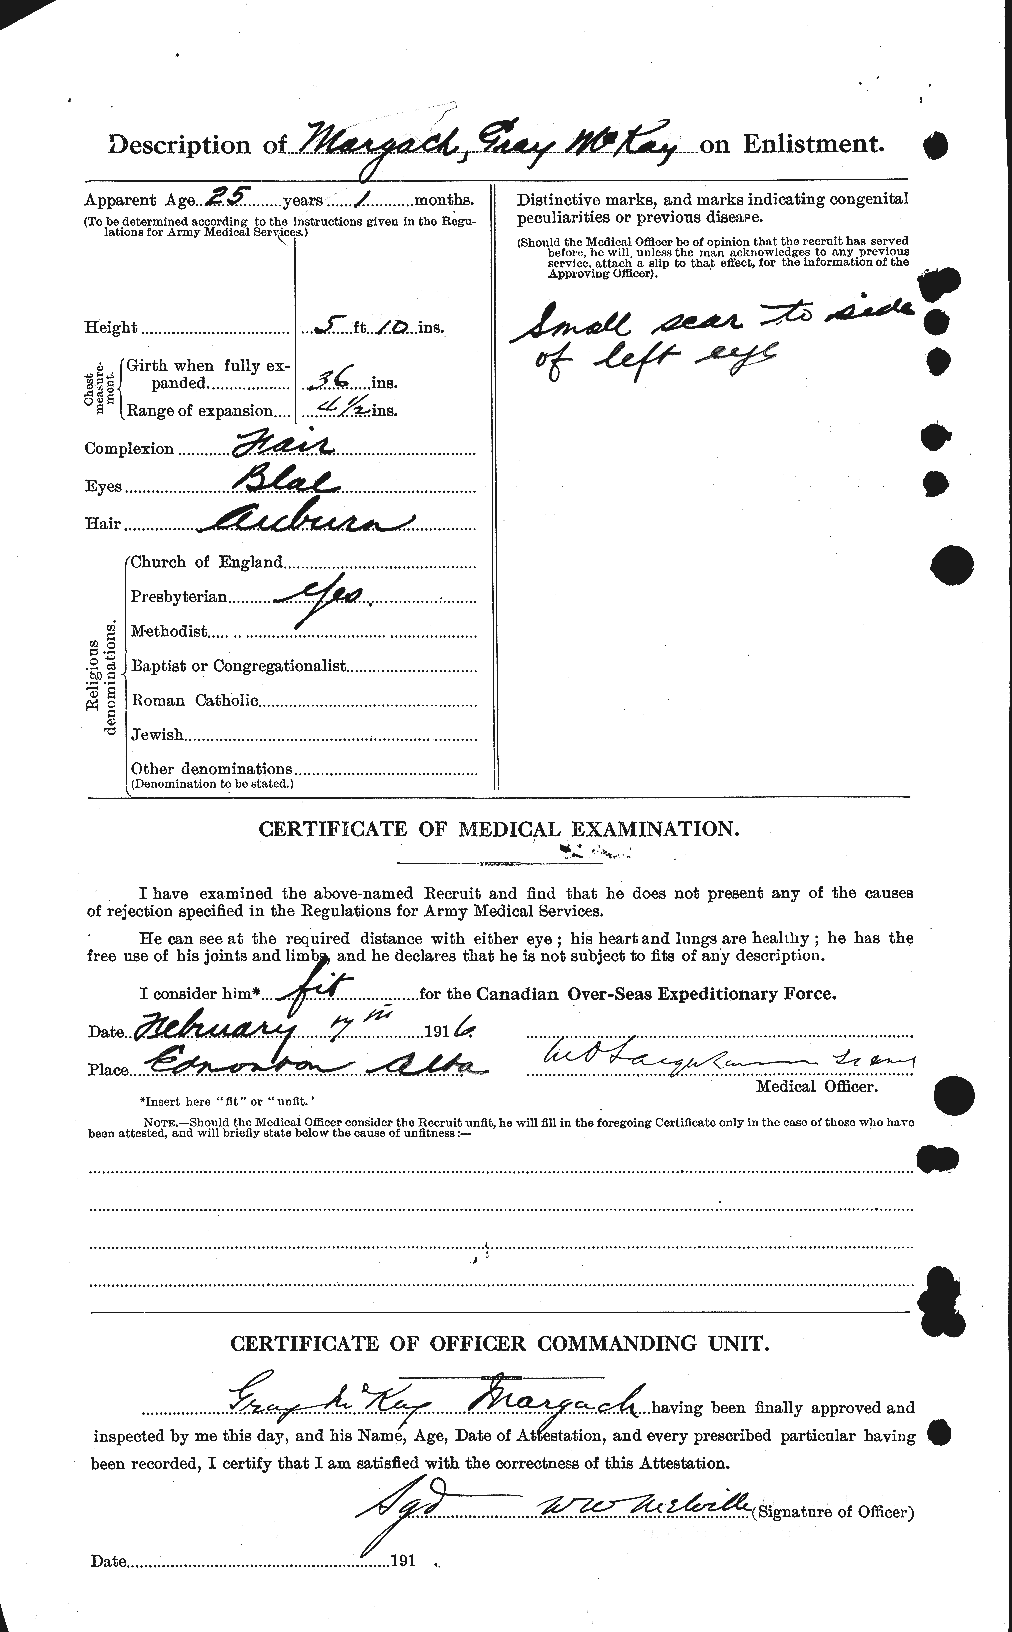 Personnel Records of the First World War - CEF 481248b